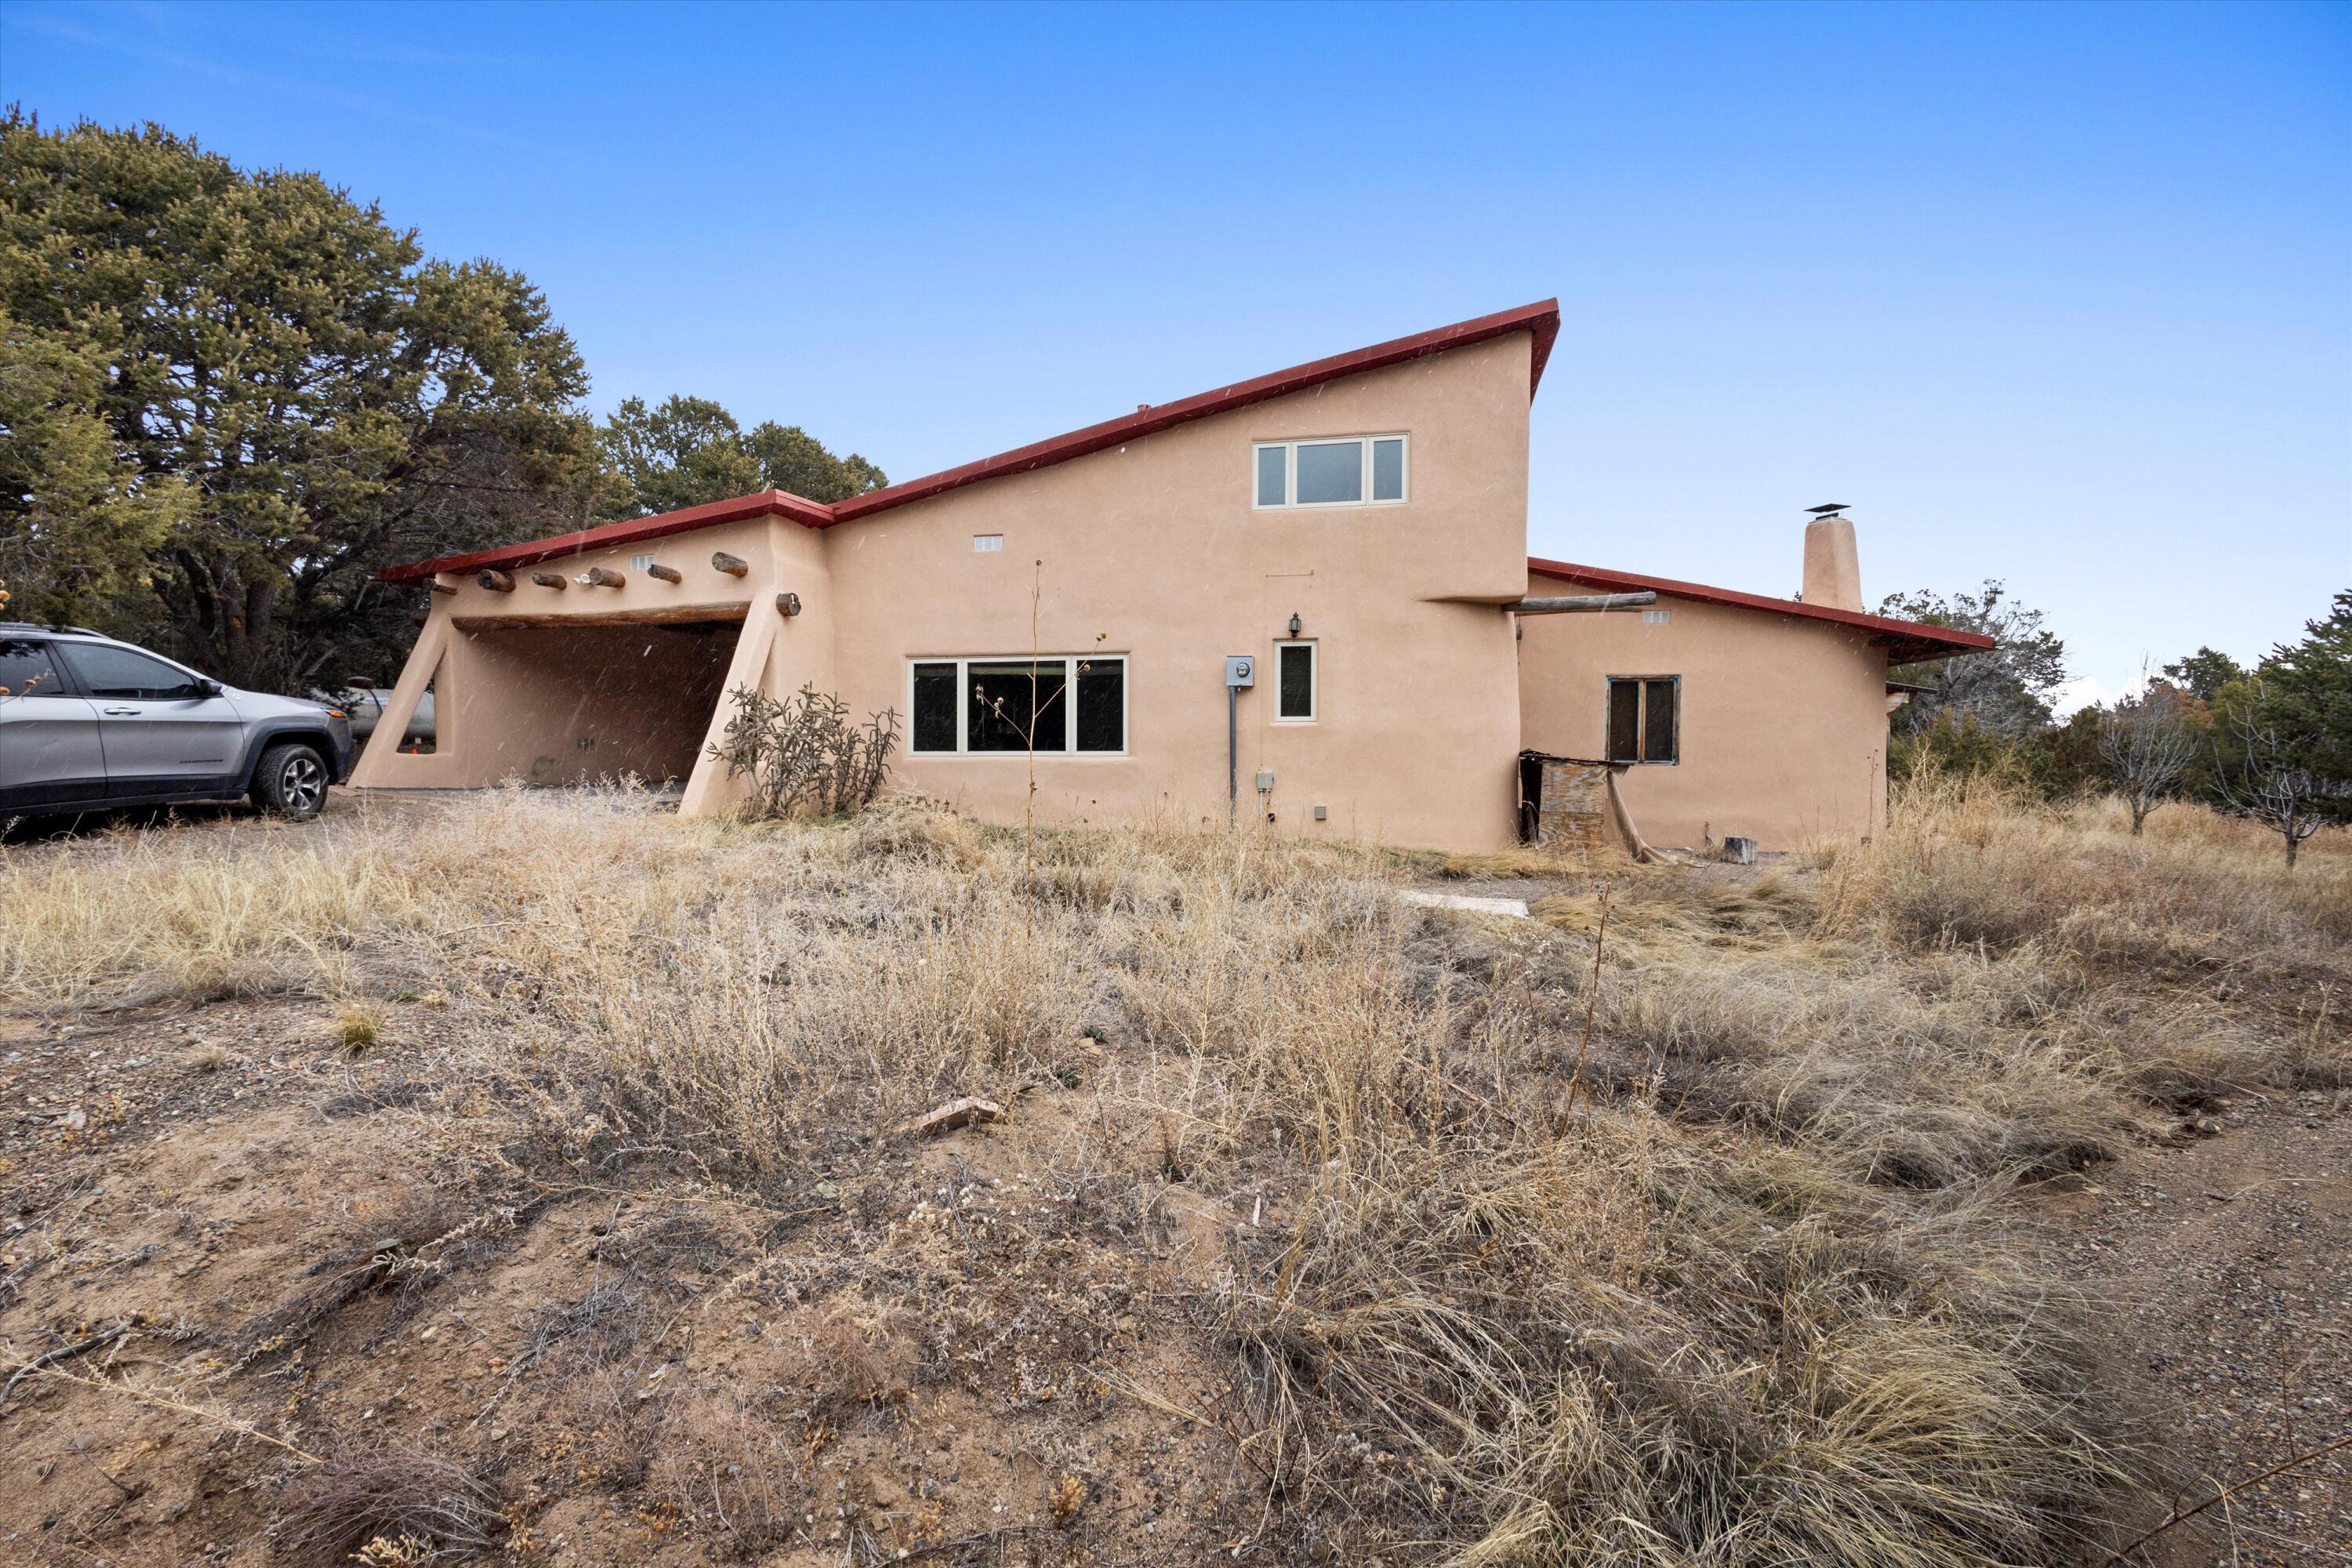 Calling All Investors and Creative Buyers! This Fixer Upper is a Unique and Special multi level Adobe with a warm and homey atmosphere. 2.5 Acres! You can easily fall in love with the Santa Fe style Viga and Latillas touches. Sunken Living Room with Kiva fireplace is grand. 2 Freestanding Pellet Stoves and Wood Burning Stove keeps it cozy all winter long. Plenty of room for the entire family and guest/teen quarters and 2 Lofts for Office or Workout Gym Space. Horses are welcome. Fenced Wooded and Meadowed lot with plenty of room to roam.